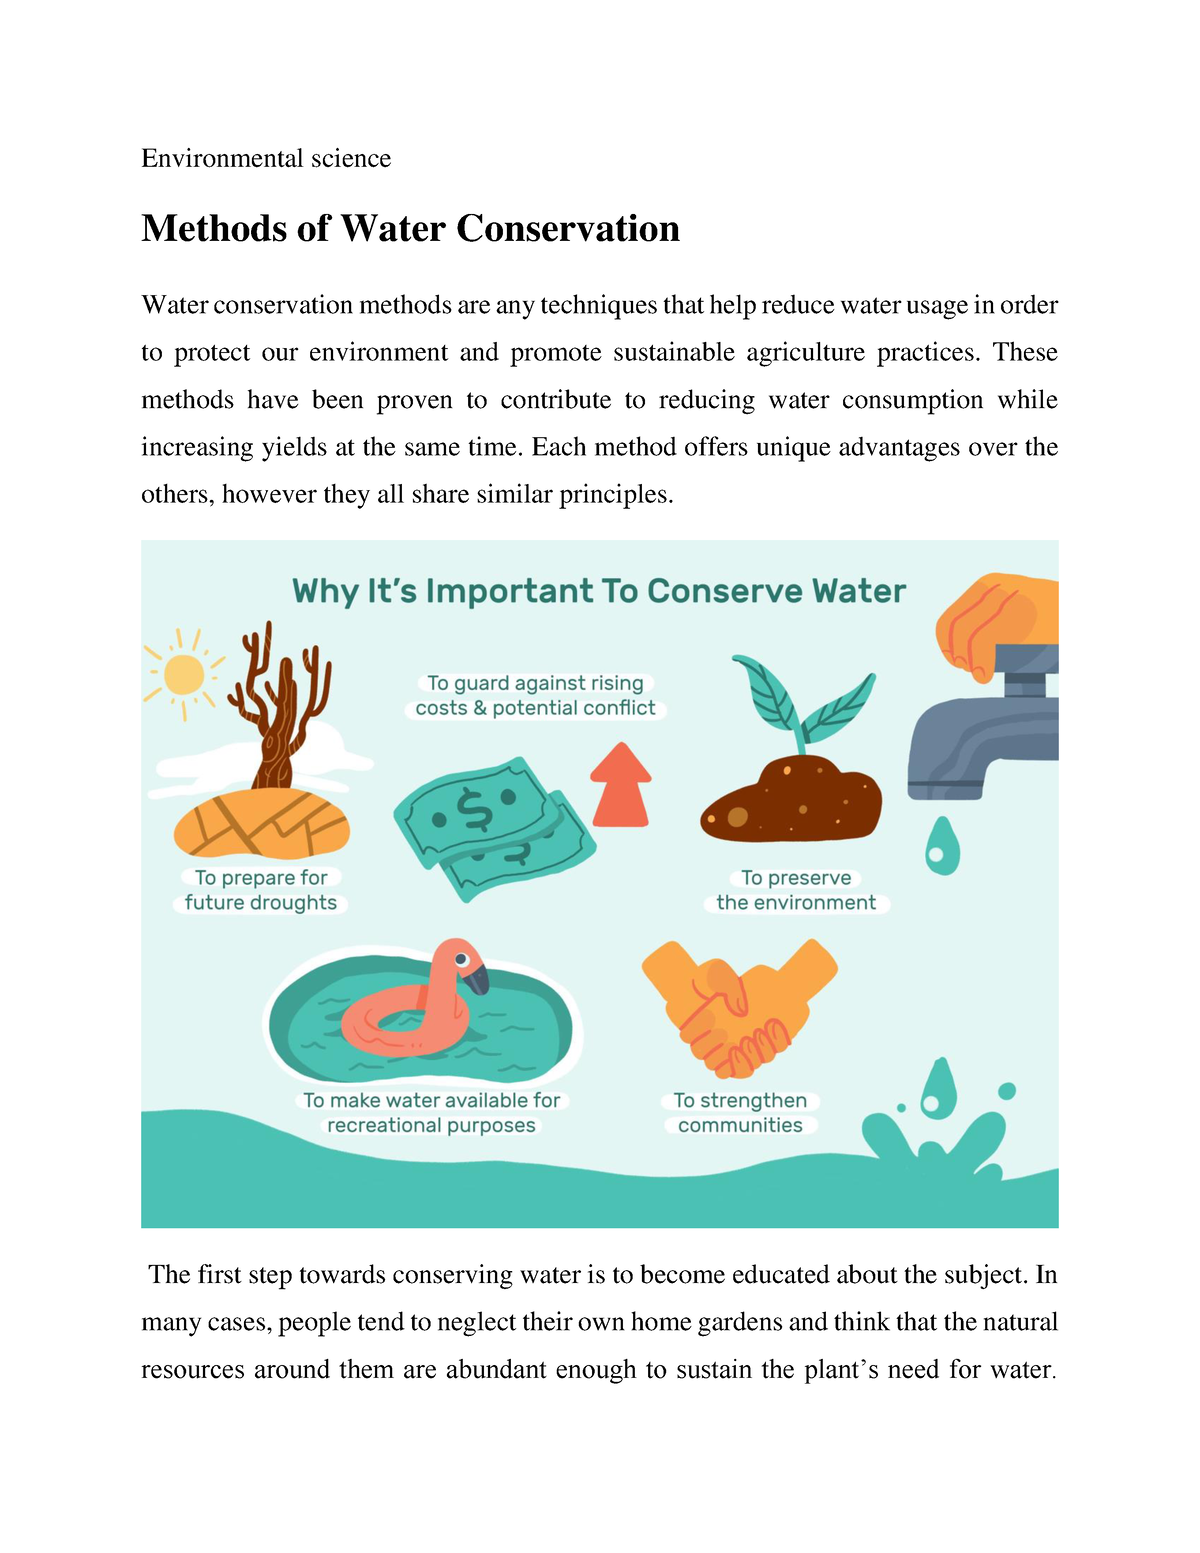 Modern techniques to conserve water by individuals or societies